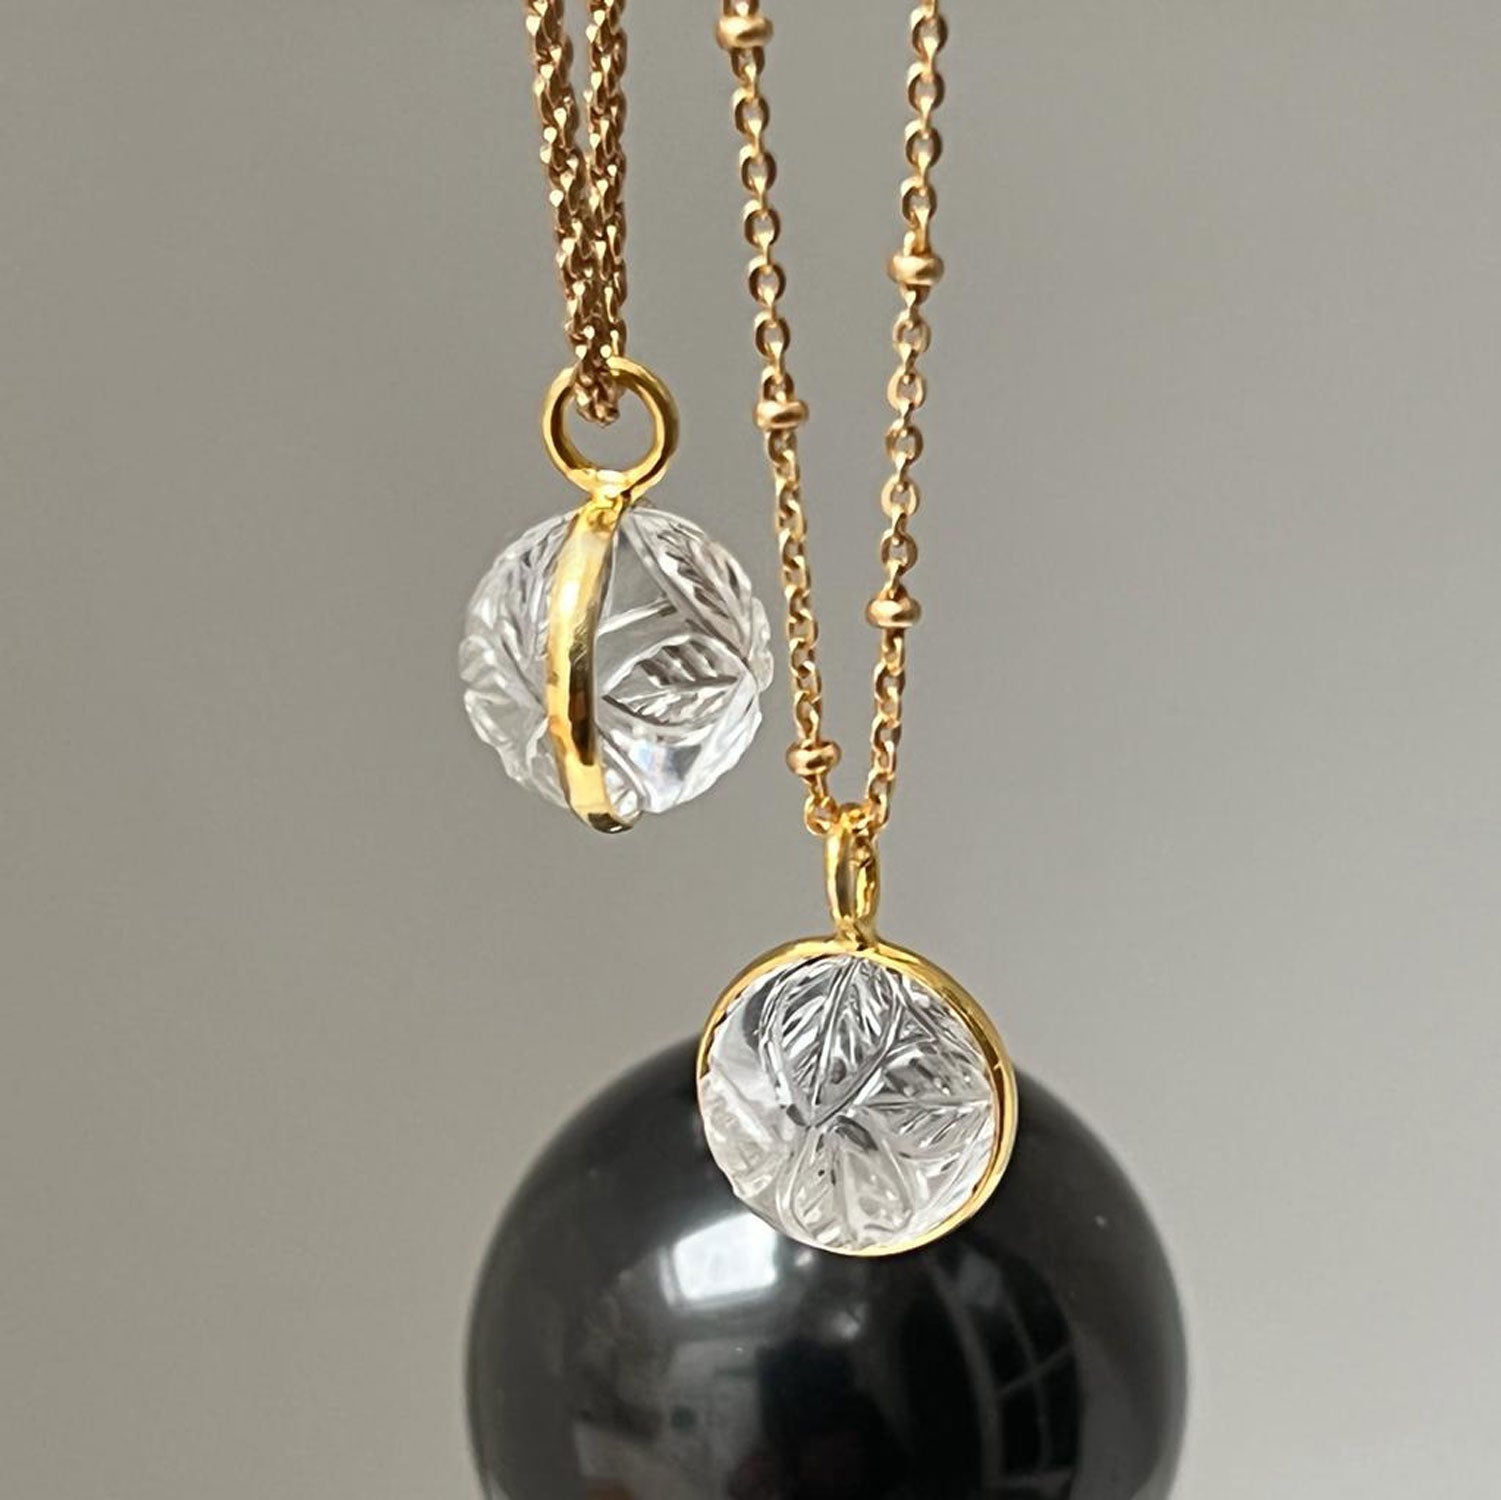 Carved Rock Quartz Ball Pendant on Heavy Long Rope Chain